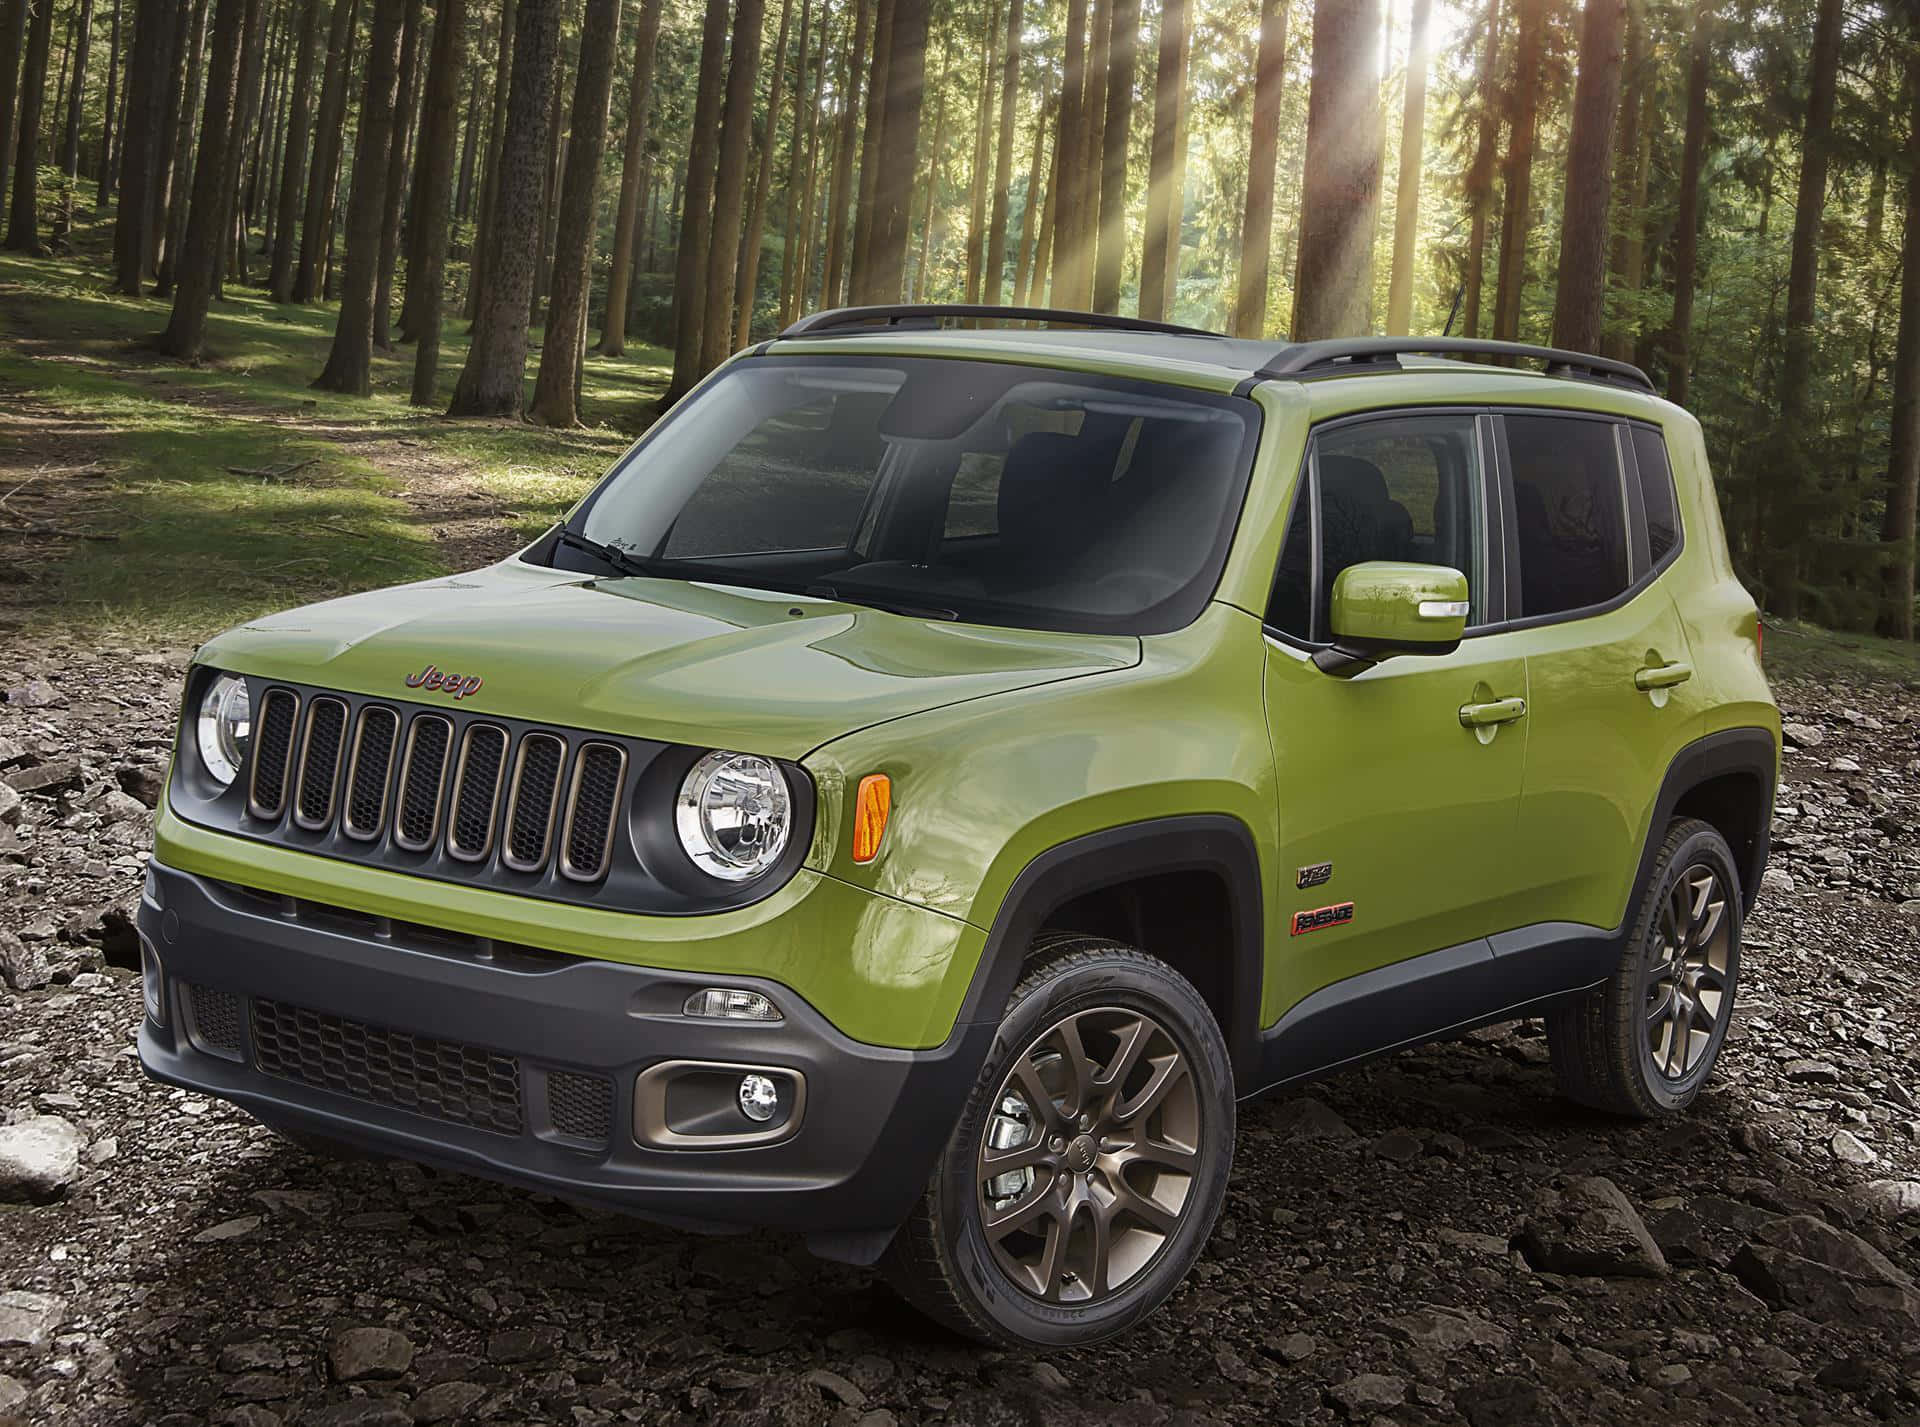 Rugged Jeep Renegade on an Off-road Adventure Wallpaper